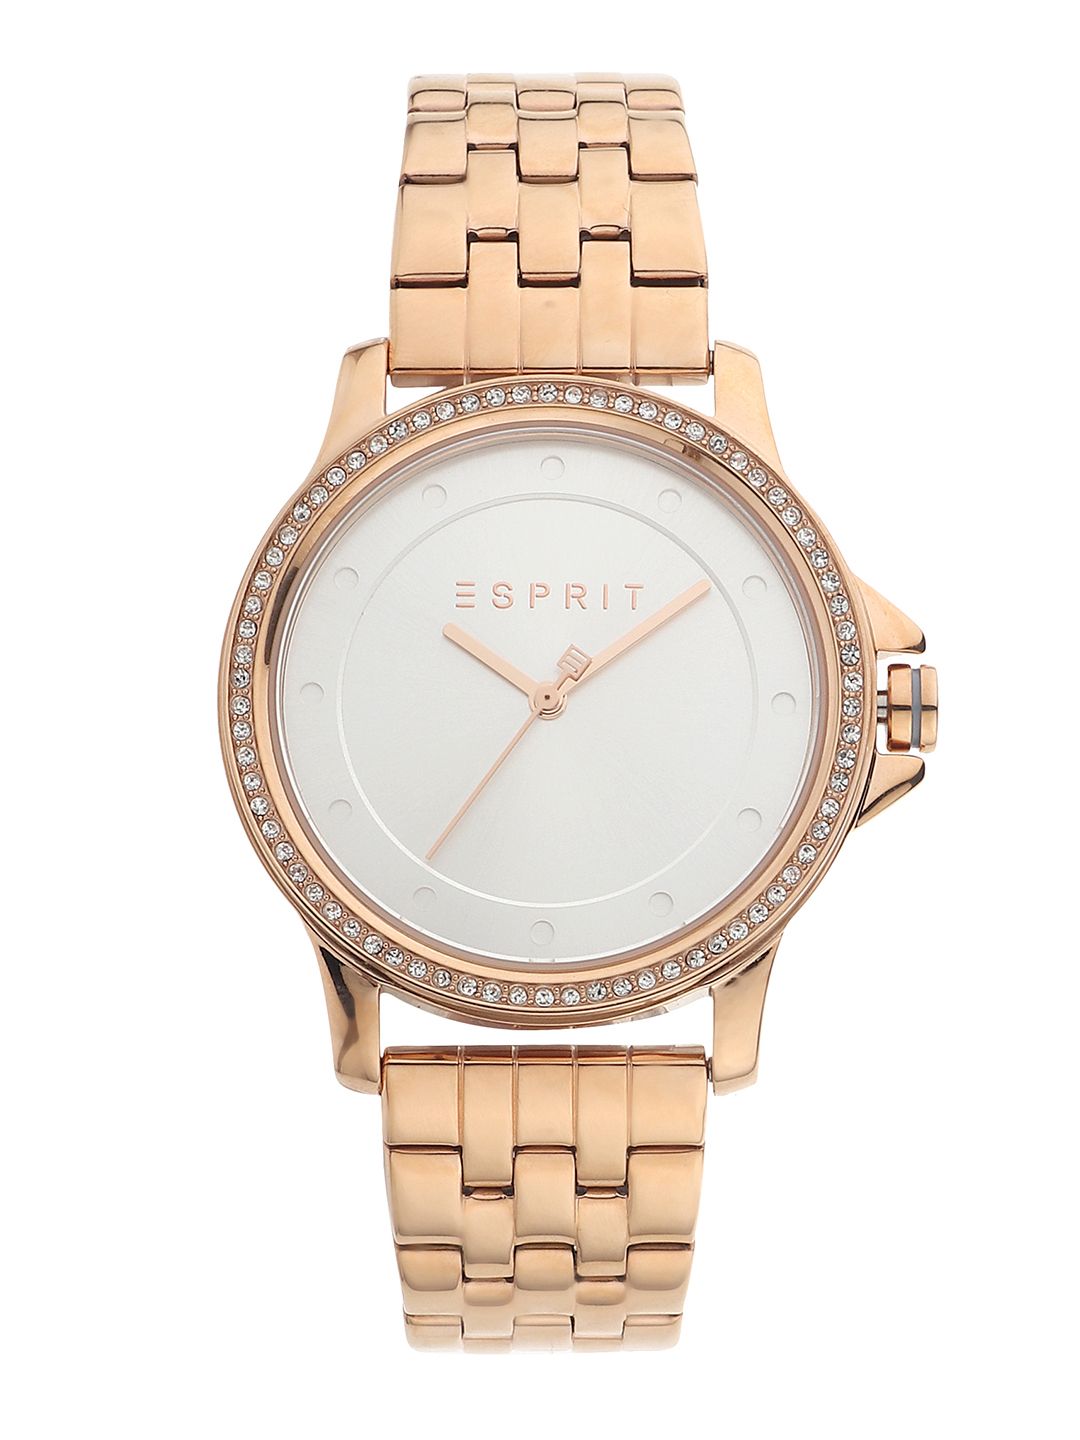 ESPRIT Women Muted Silver-Toned Solid Analogue Watch ES1L143M0095 Price in India